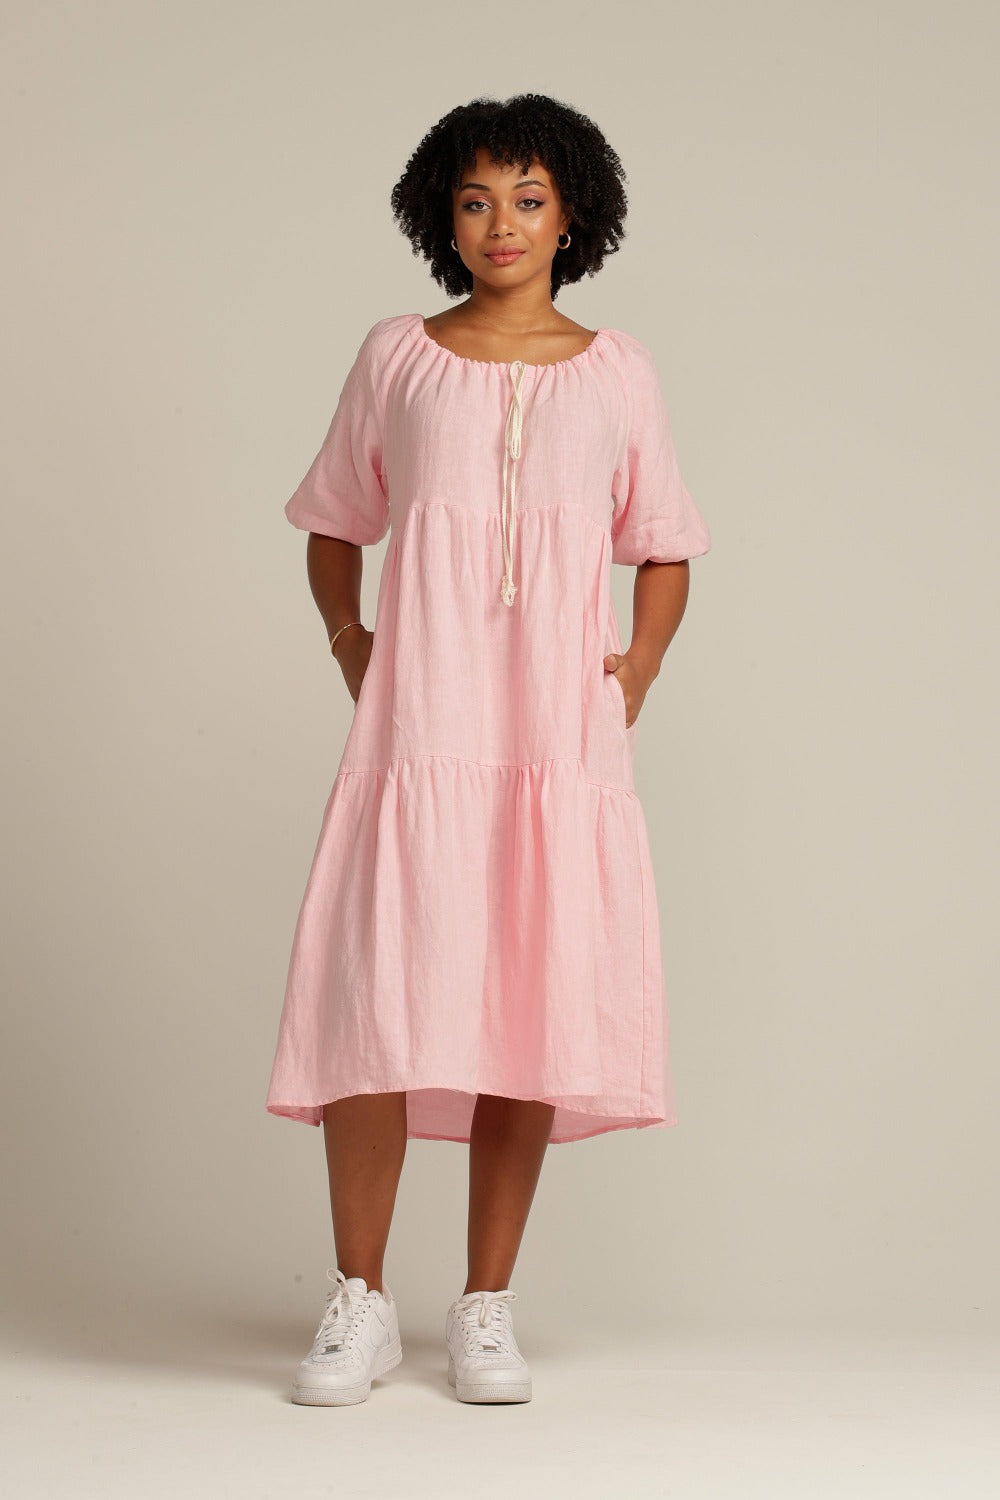 brown woman with black hair is wearing a linen dress that is light pink, she has her hands in the pockets